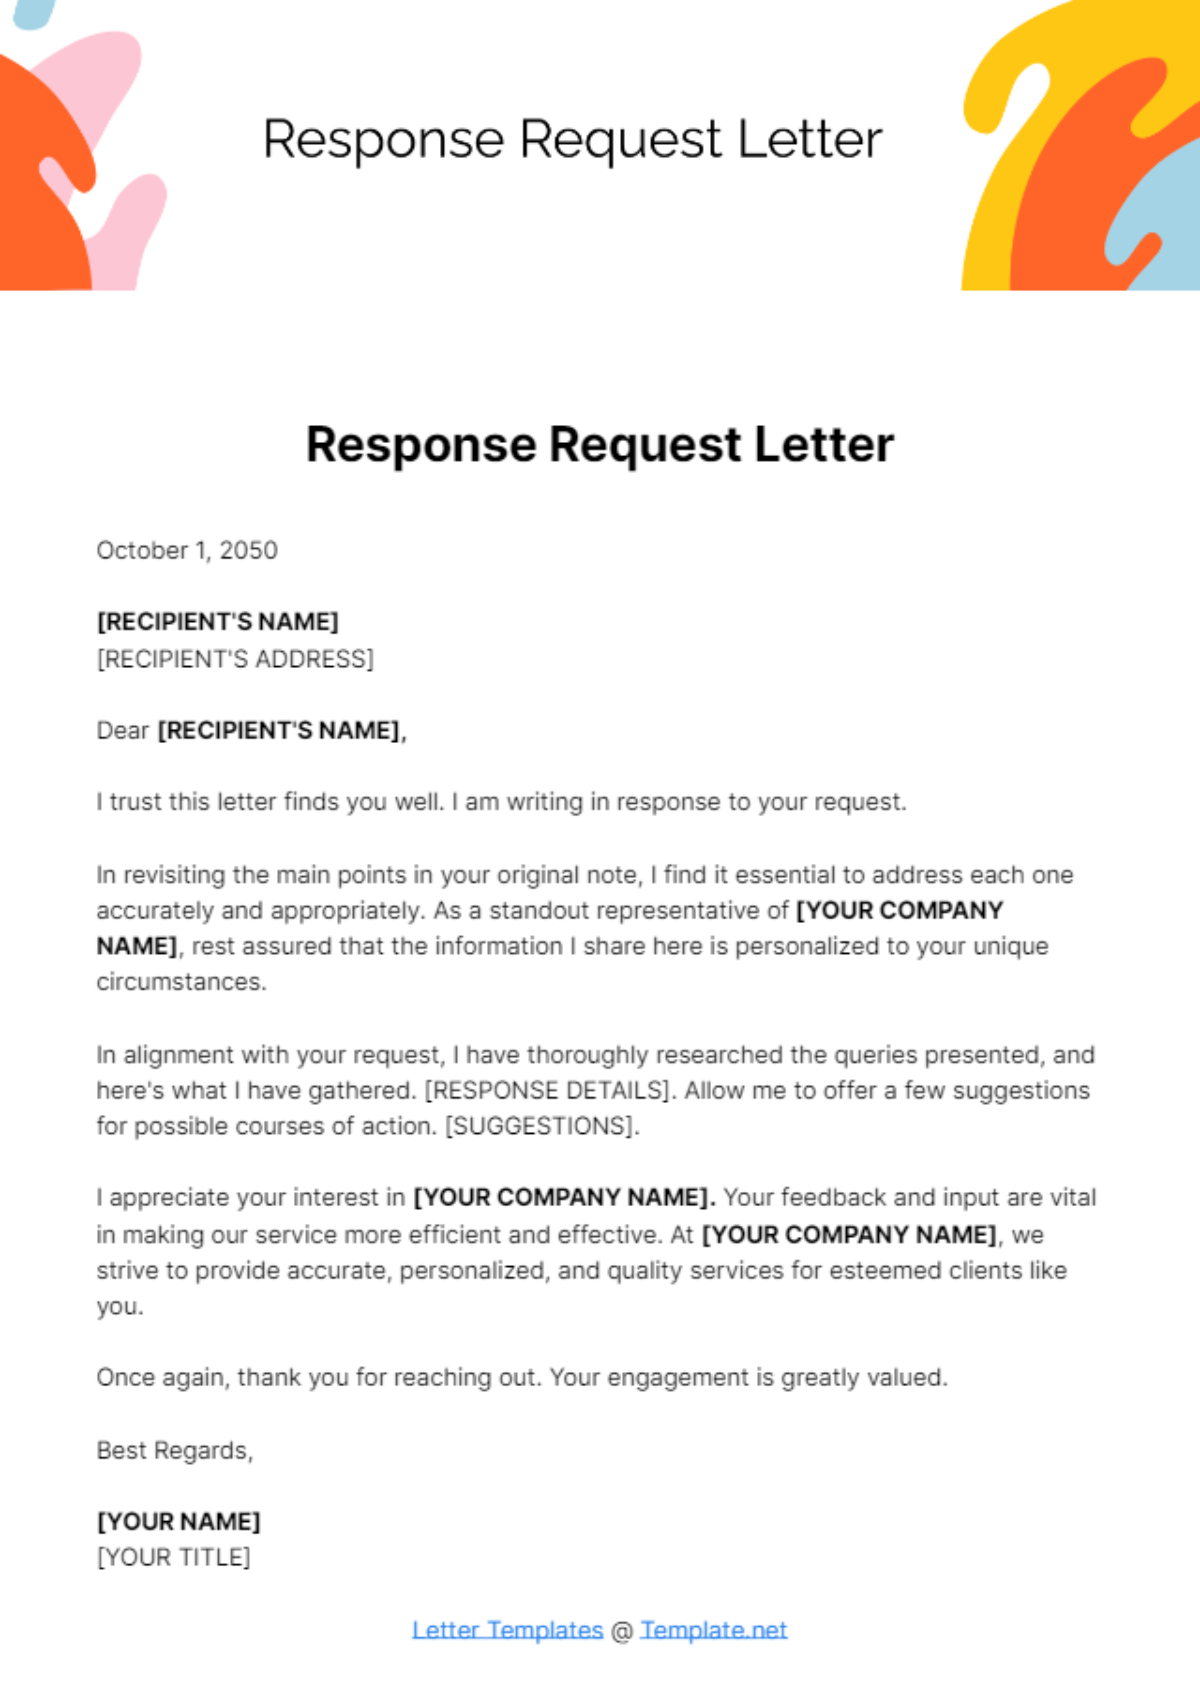 Free Response Request Letter Template